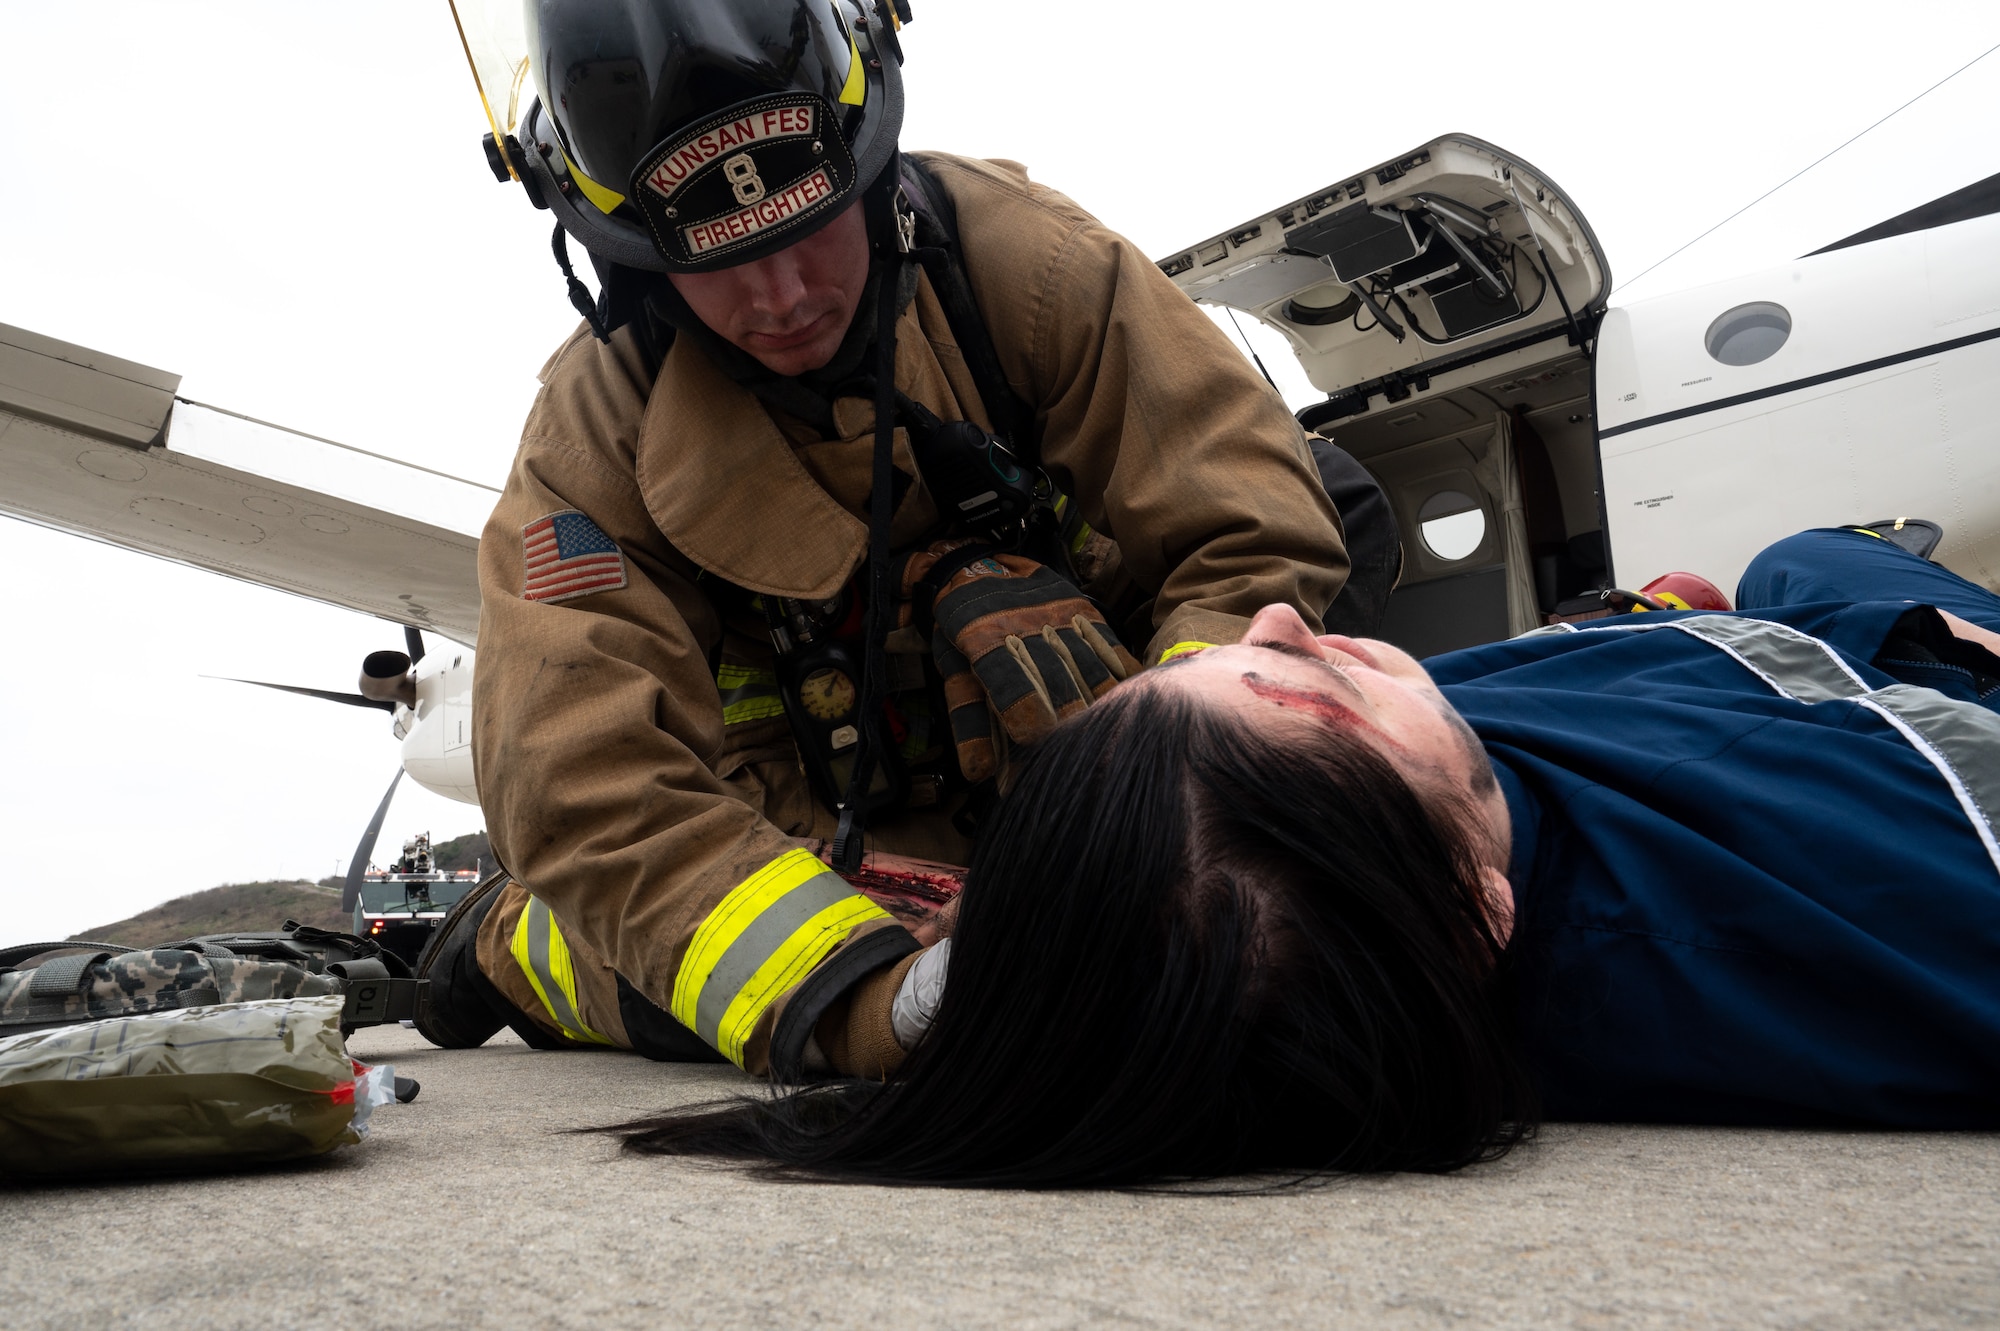 Simulated victim laying on the ground while a firefighter attends to them during an exercise.